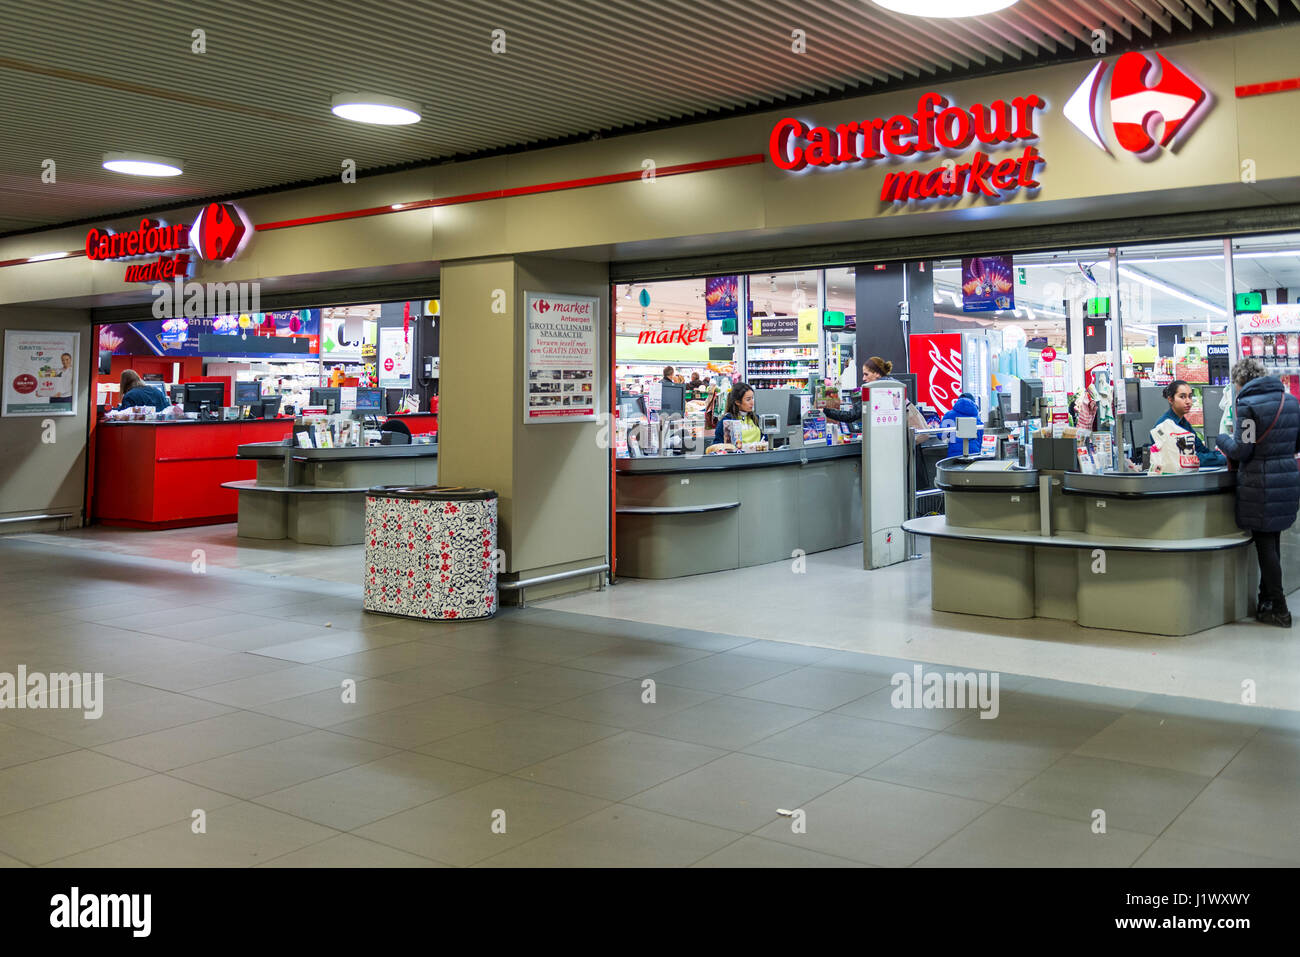 Carrefour market store at mall Stock Photo - Alamy